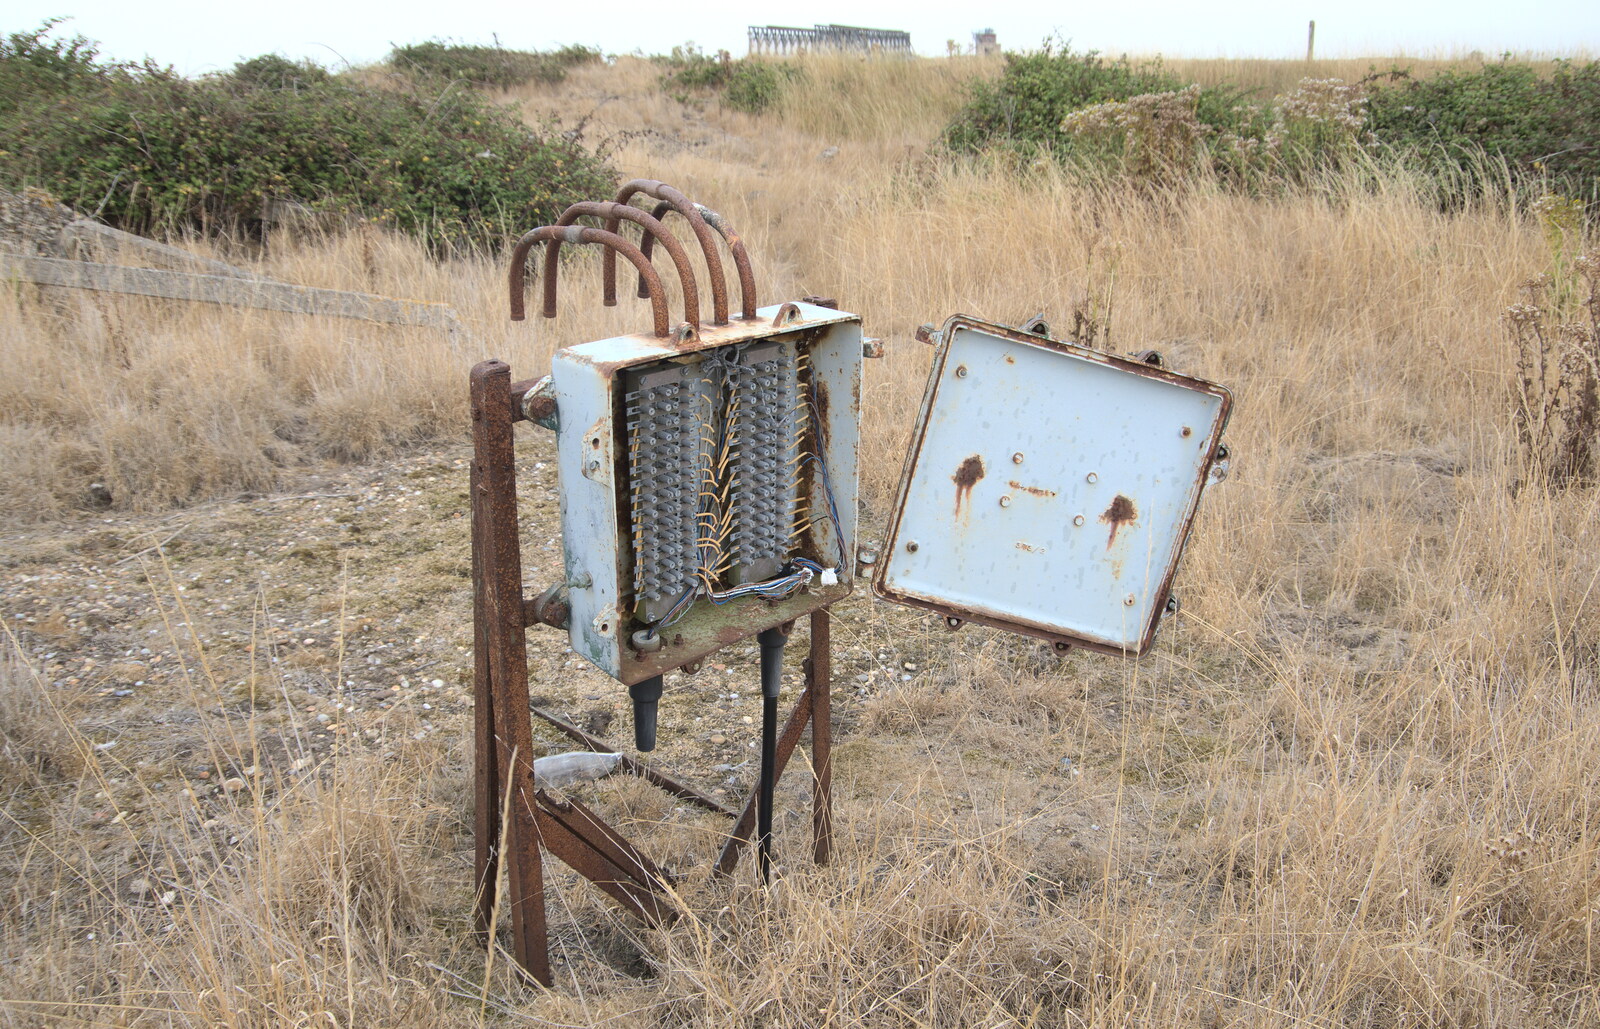 More abandoned electrical gear from A Trip to Orford Ness, Orford, Suffolk - 16th August 2022